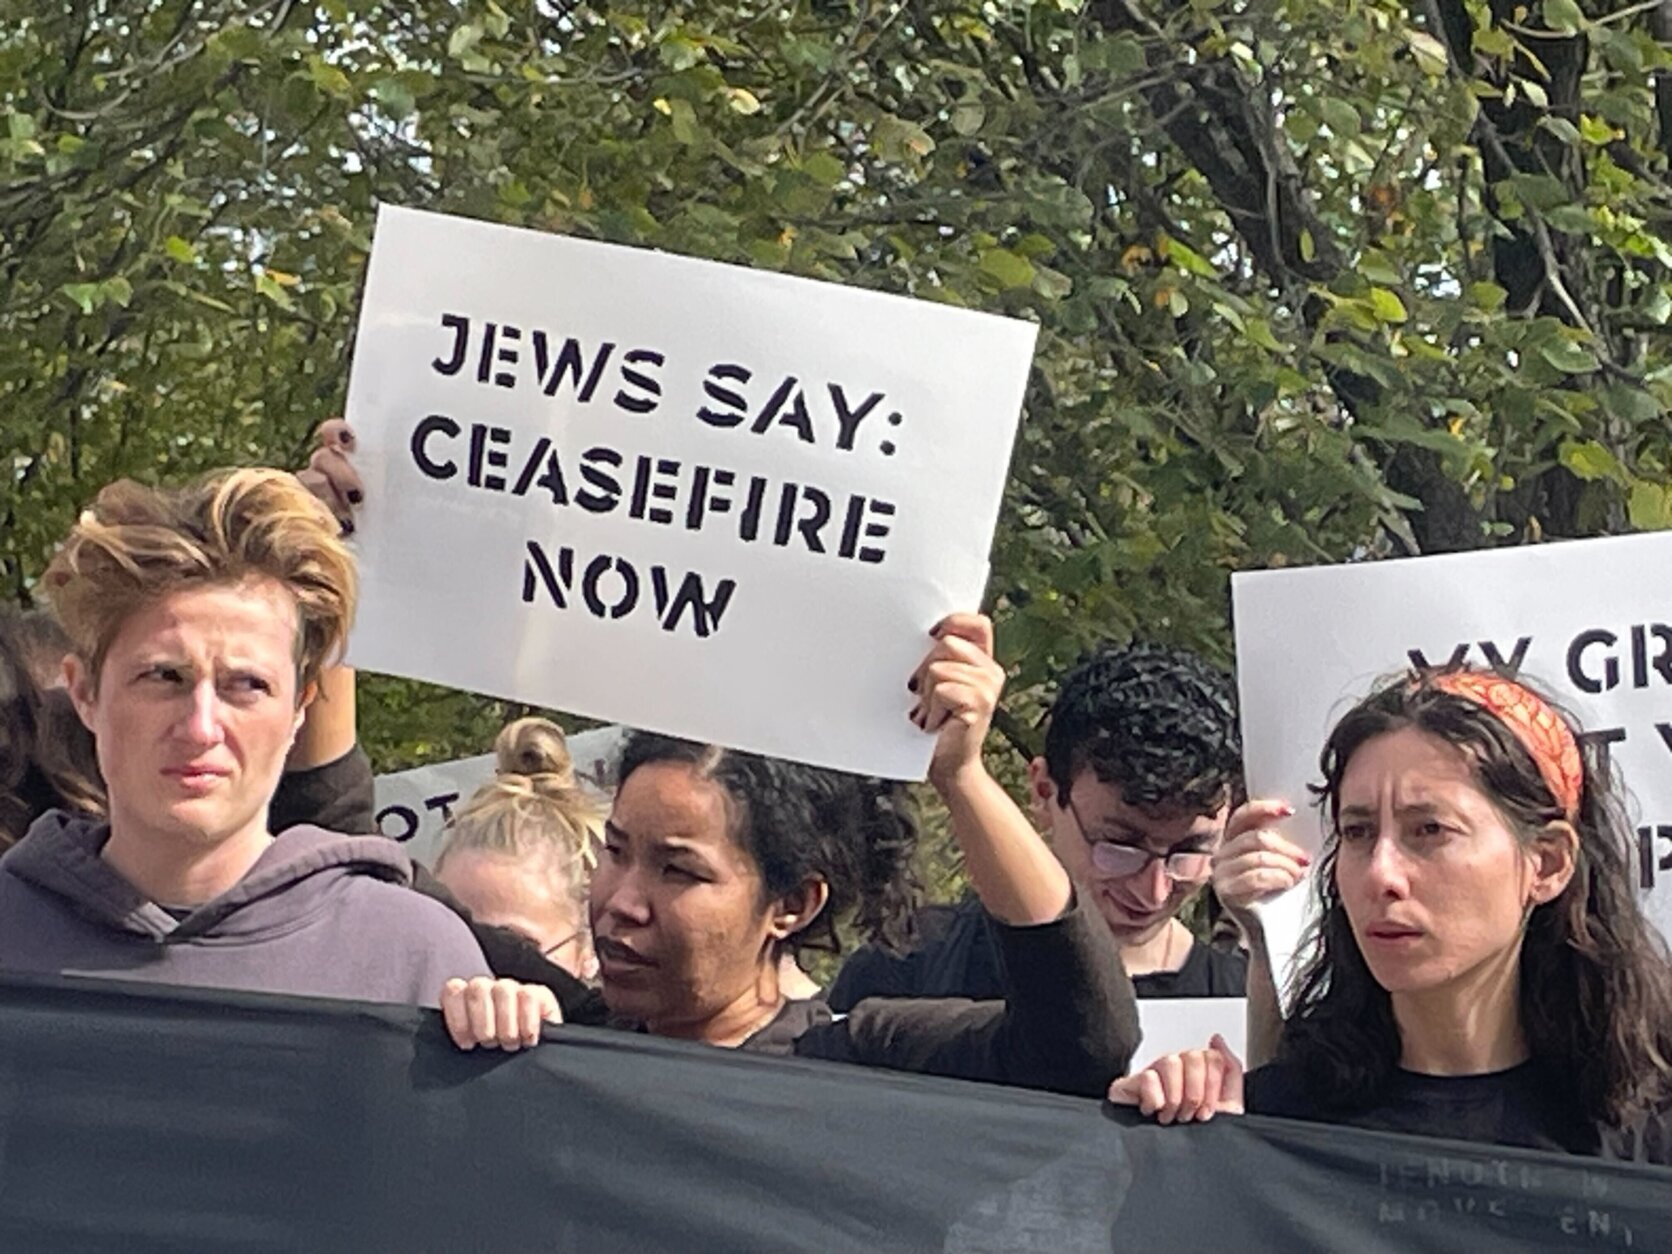 Unfathomably unacceptable': Protest outside White House calls for  cease-fire in Israel and Gaza - WTOP News